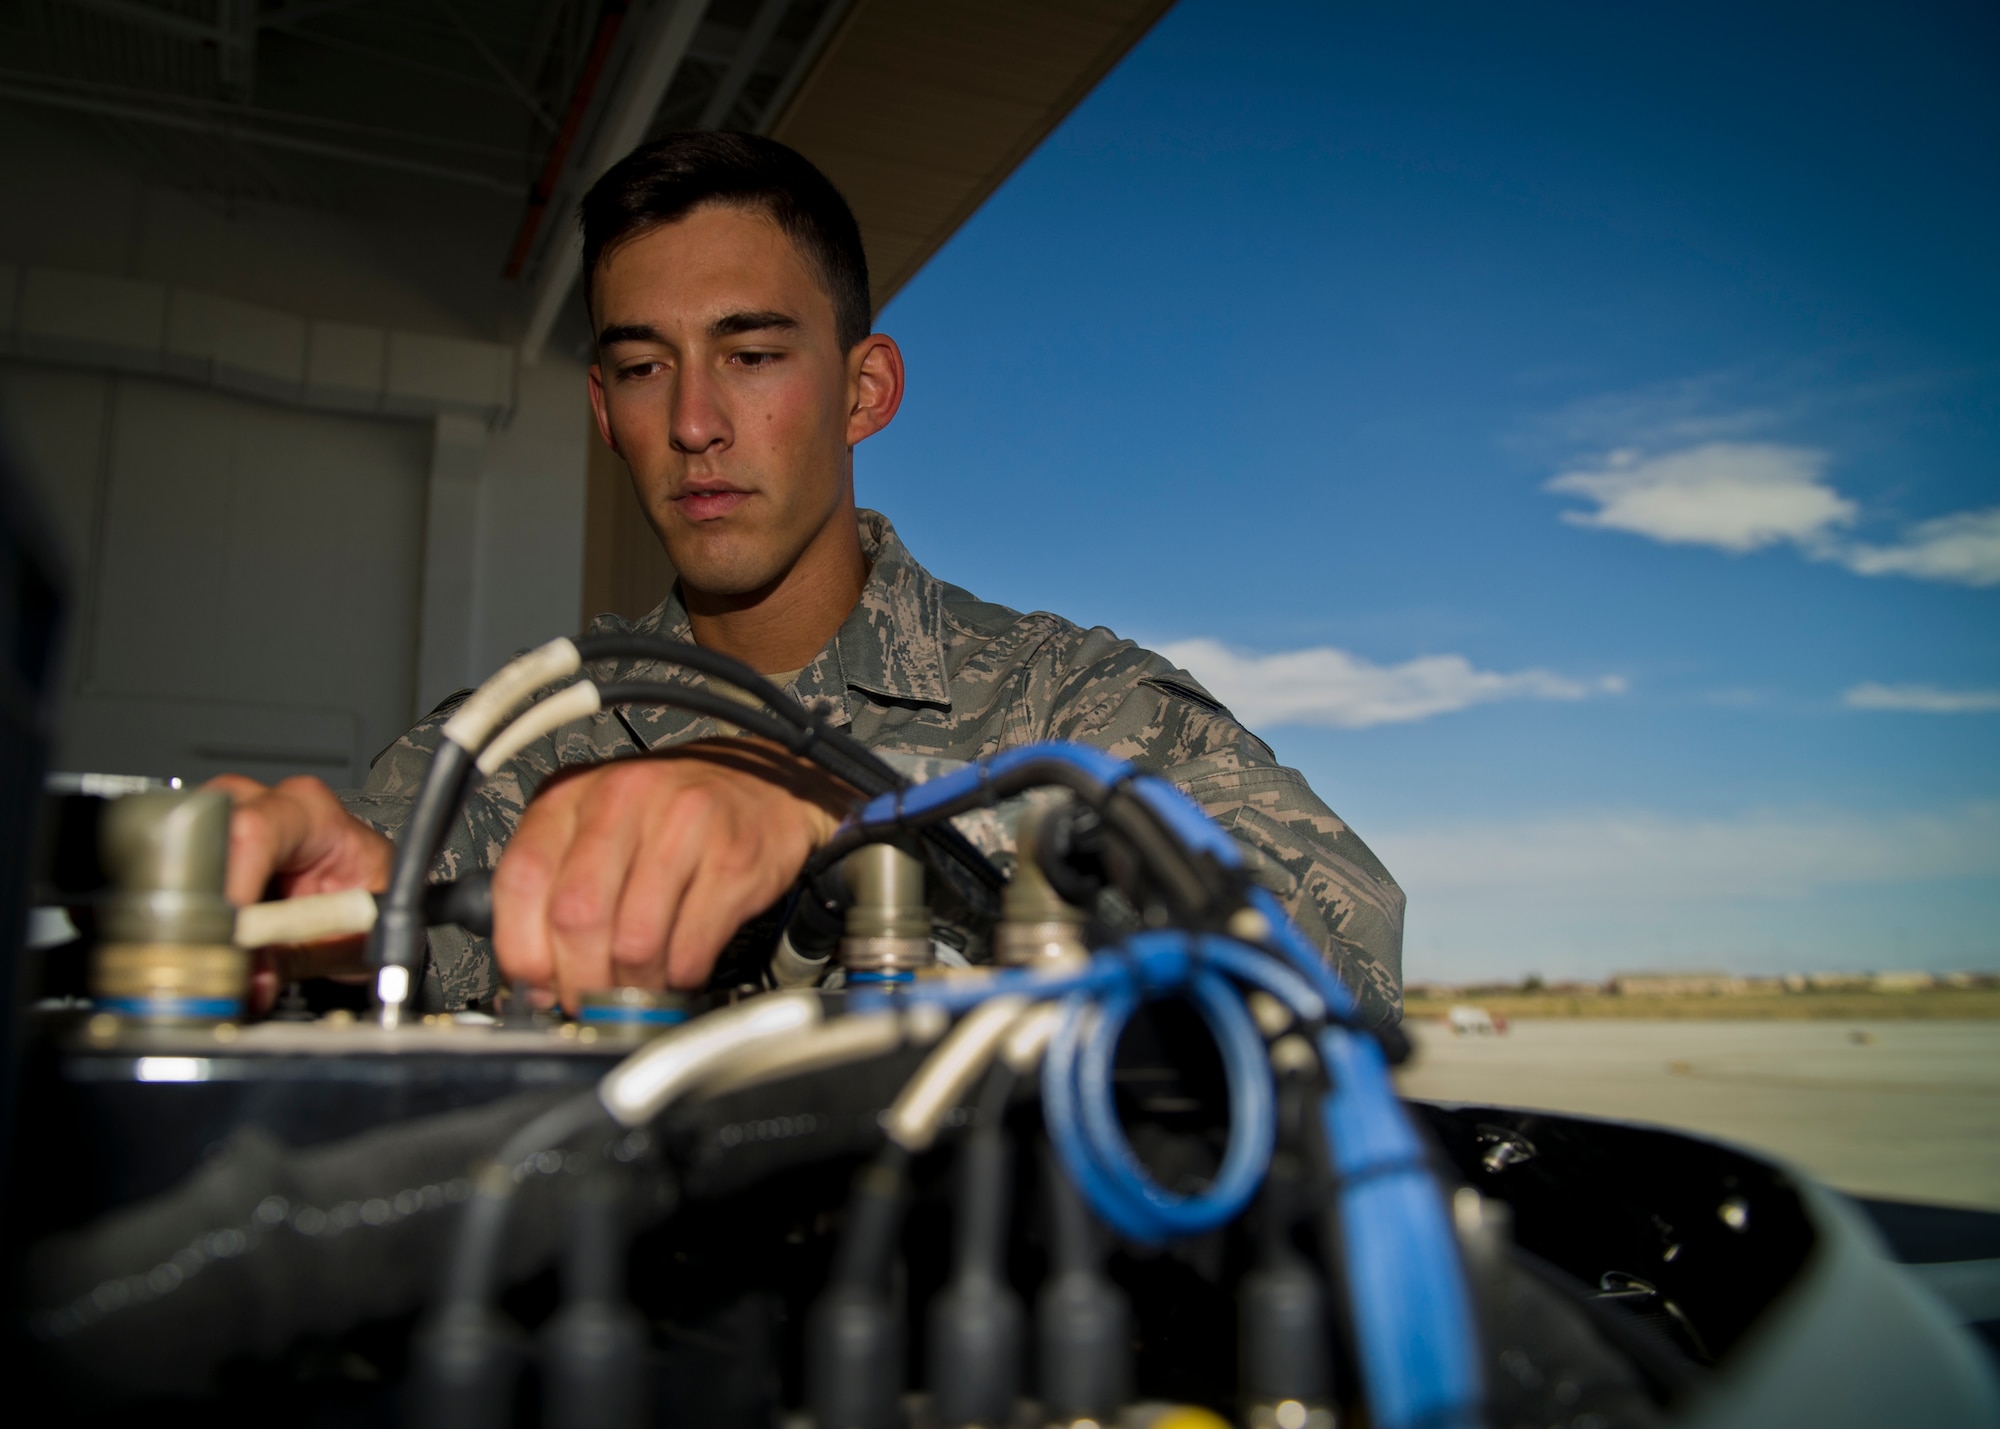 Senior Airman Aaron Feliciano, an avionics technician from the 49th Aircraft Maintenance Squadron, maintains an MQ-9 Reaper at Holloman Air Force Base, N.M., June 27.  Feliciano was recently selected as one of Air Combat Command’s six Outstanding Airmen of the Year for 2014.  Feliciano was hand-picked above many other qualified Airmen for his work performance, substantial self-improvement and significant community involvement. (U.S. Air Force photo by Airman 1st Class Aaron Montoya/Released)